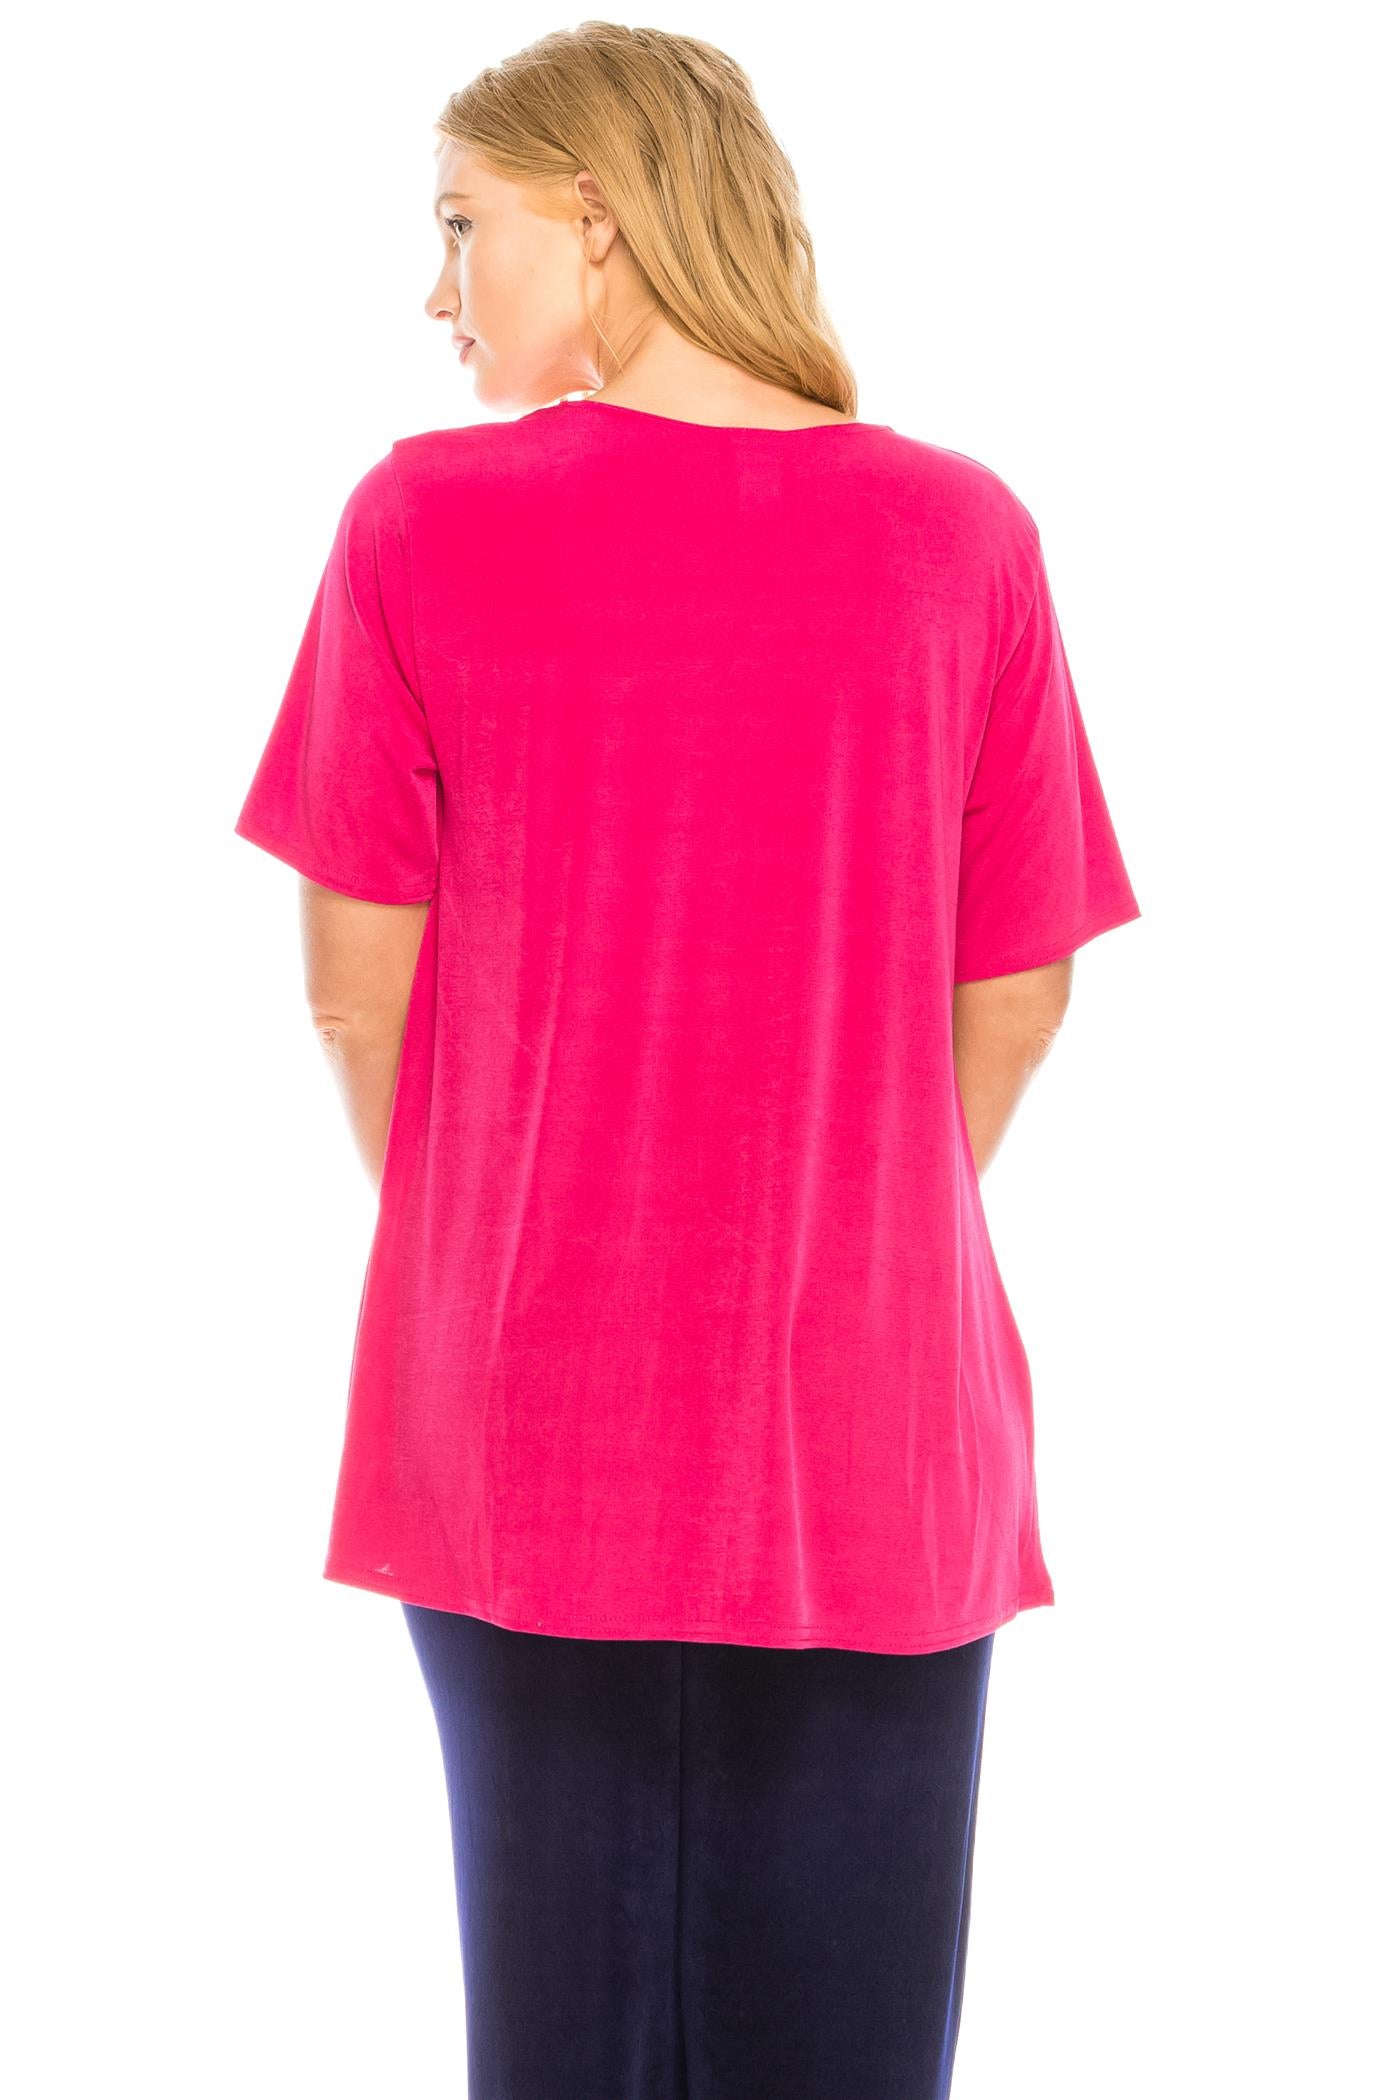 90% polyester / 10% spandex  Look as sharp as ever in this round neck short sleeve top - no wrinkles, no fuss! Its lightweight fabric is designed to keep you feeling comfortable and stylish all day long. Take on the world in confidence!  Hand or machine wash in cold water.  Made in U.S.A